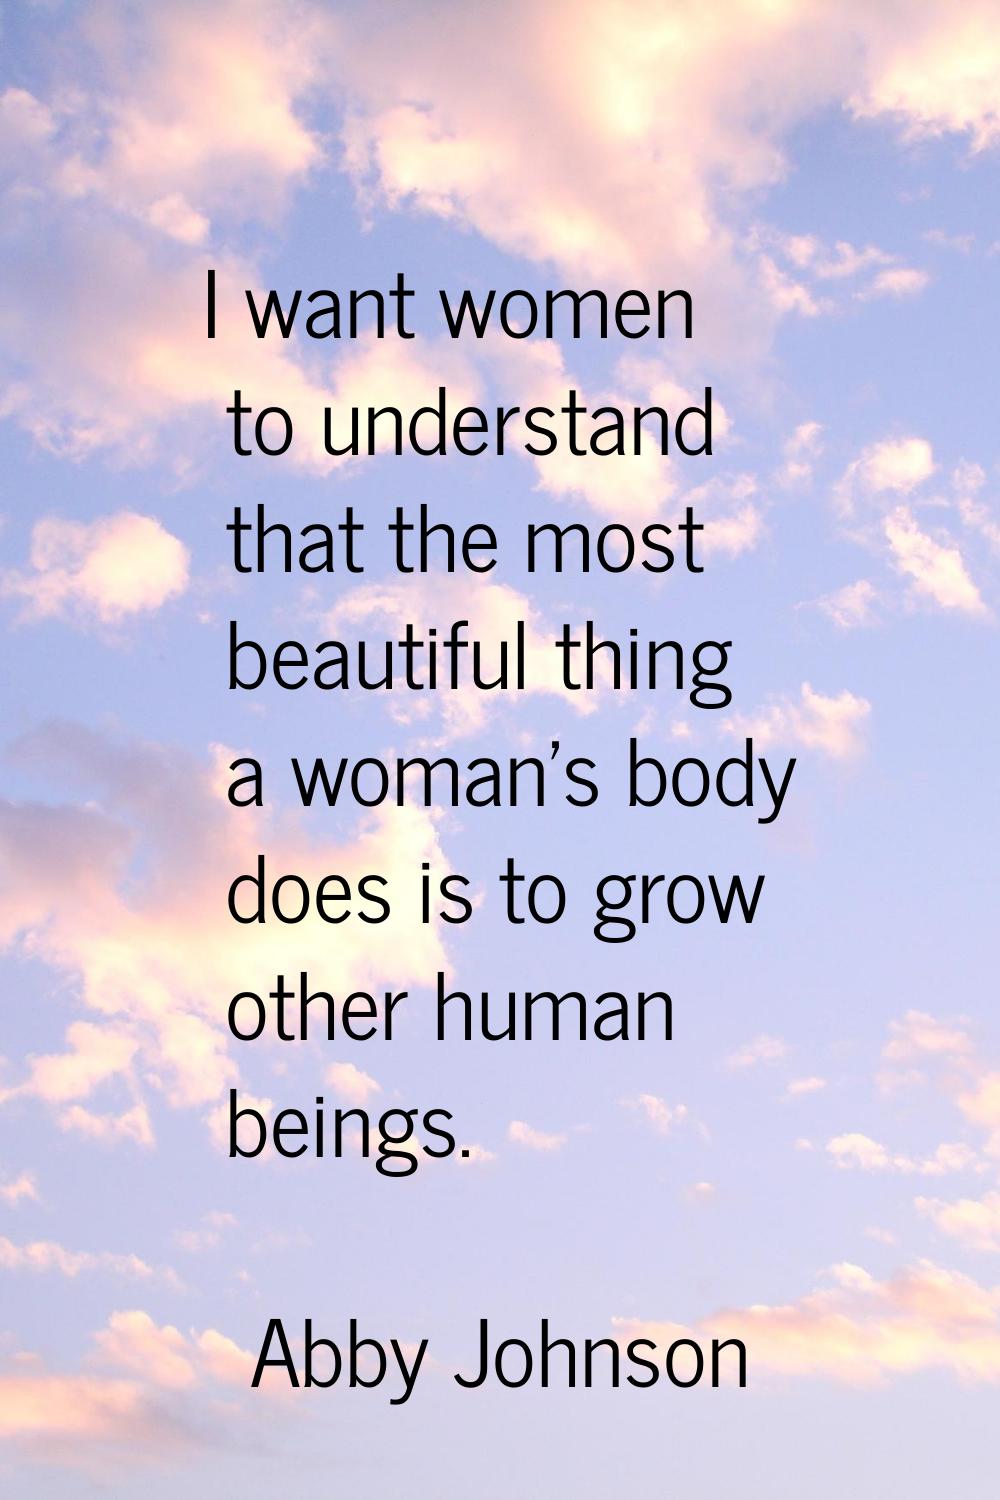 I want women to understand that the most beautiful thing a woman's body does is to grow other human